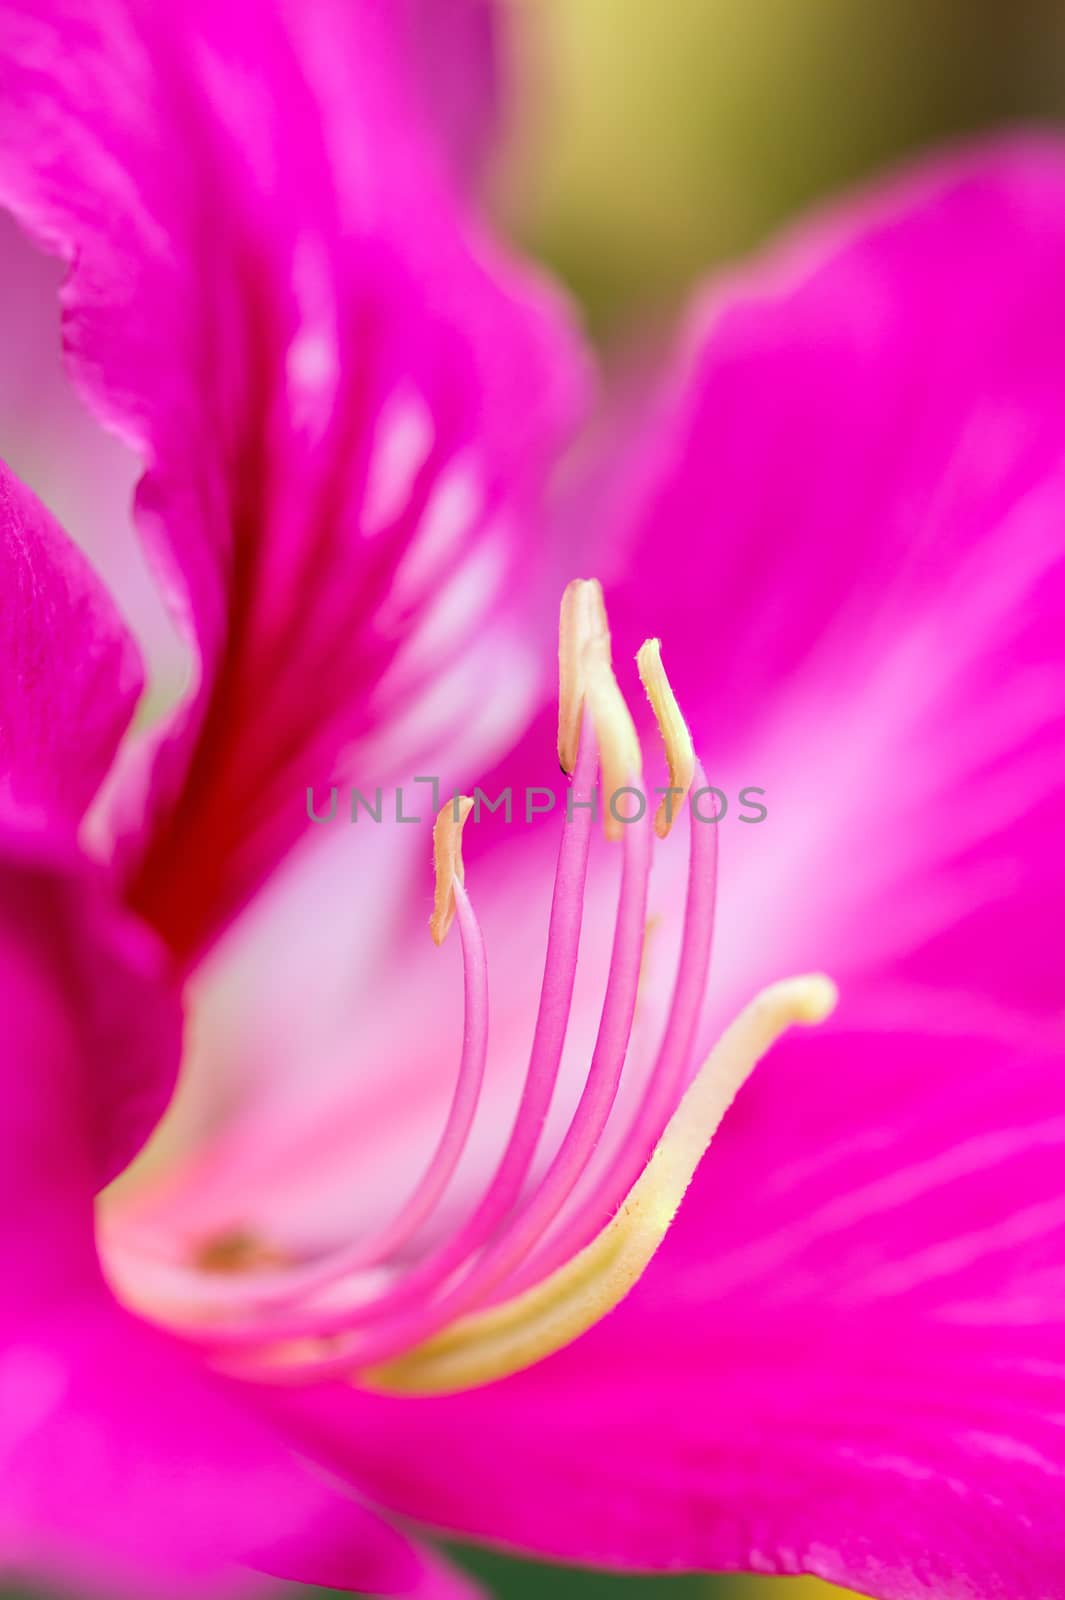 Flower carpel close up by AEyZRiO